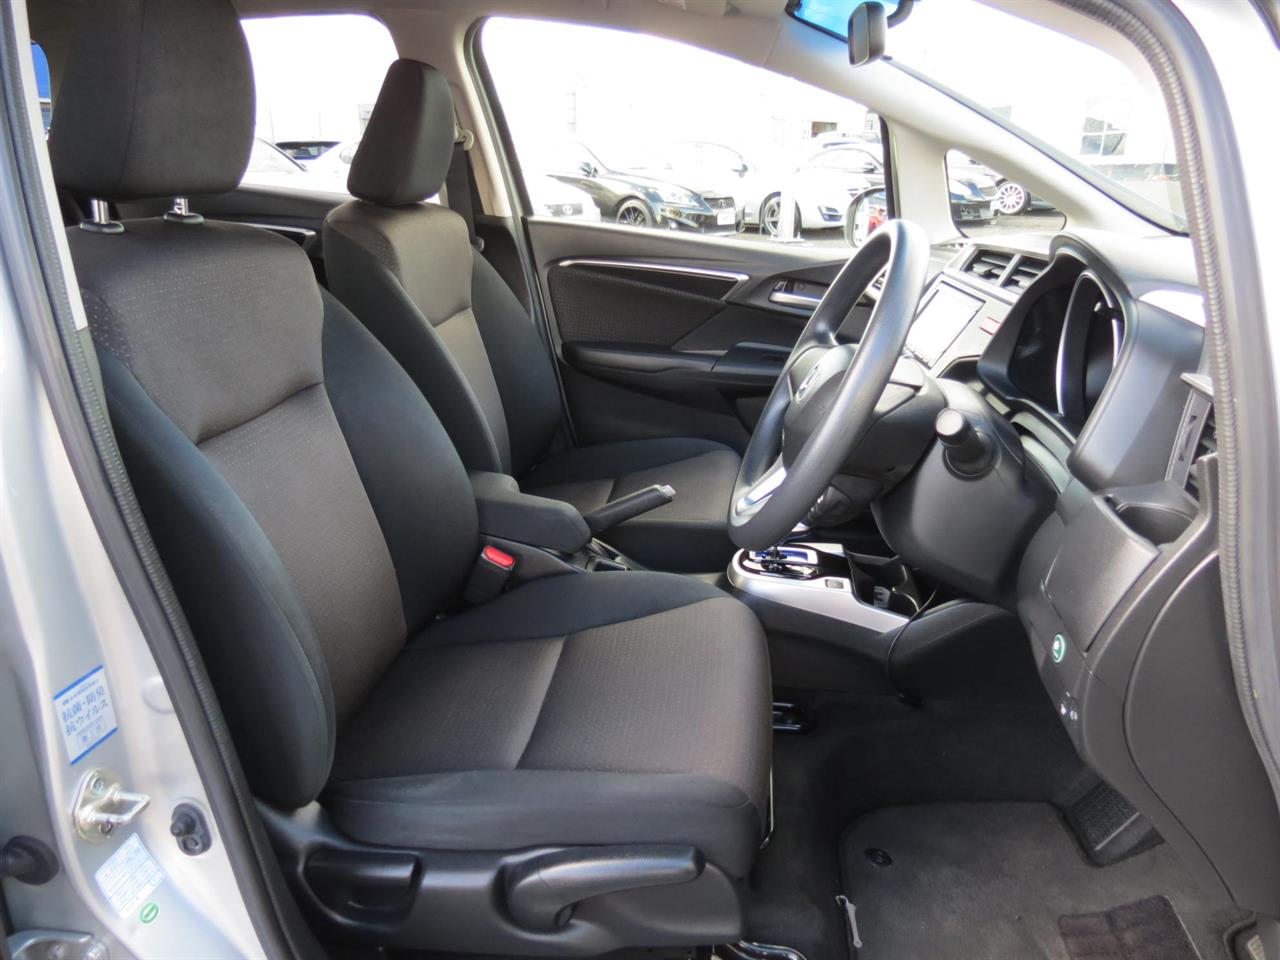 2014 Honda Fit only $45 weekly